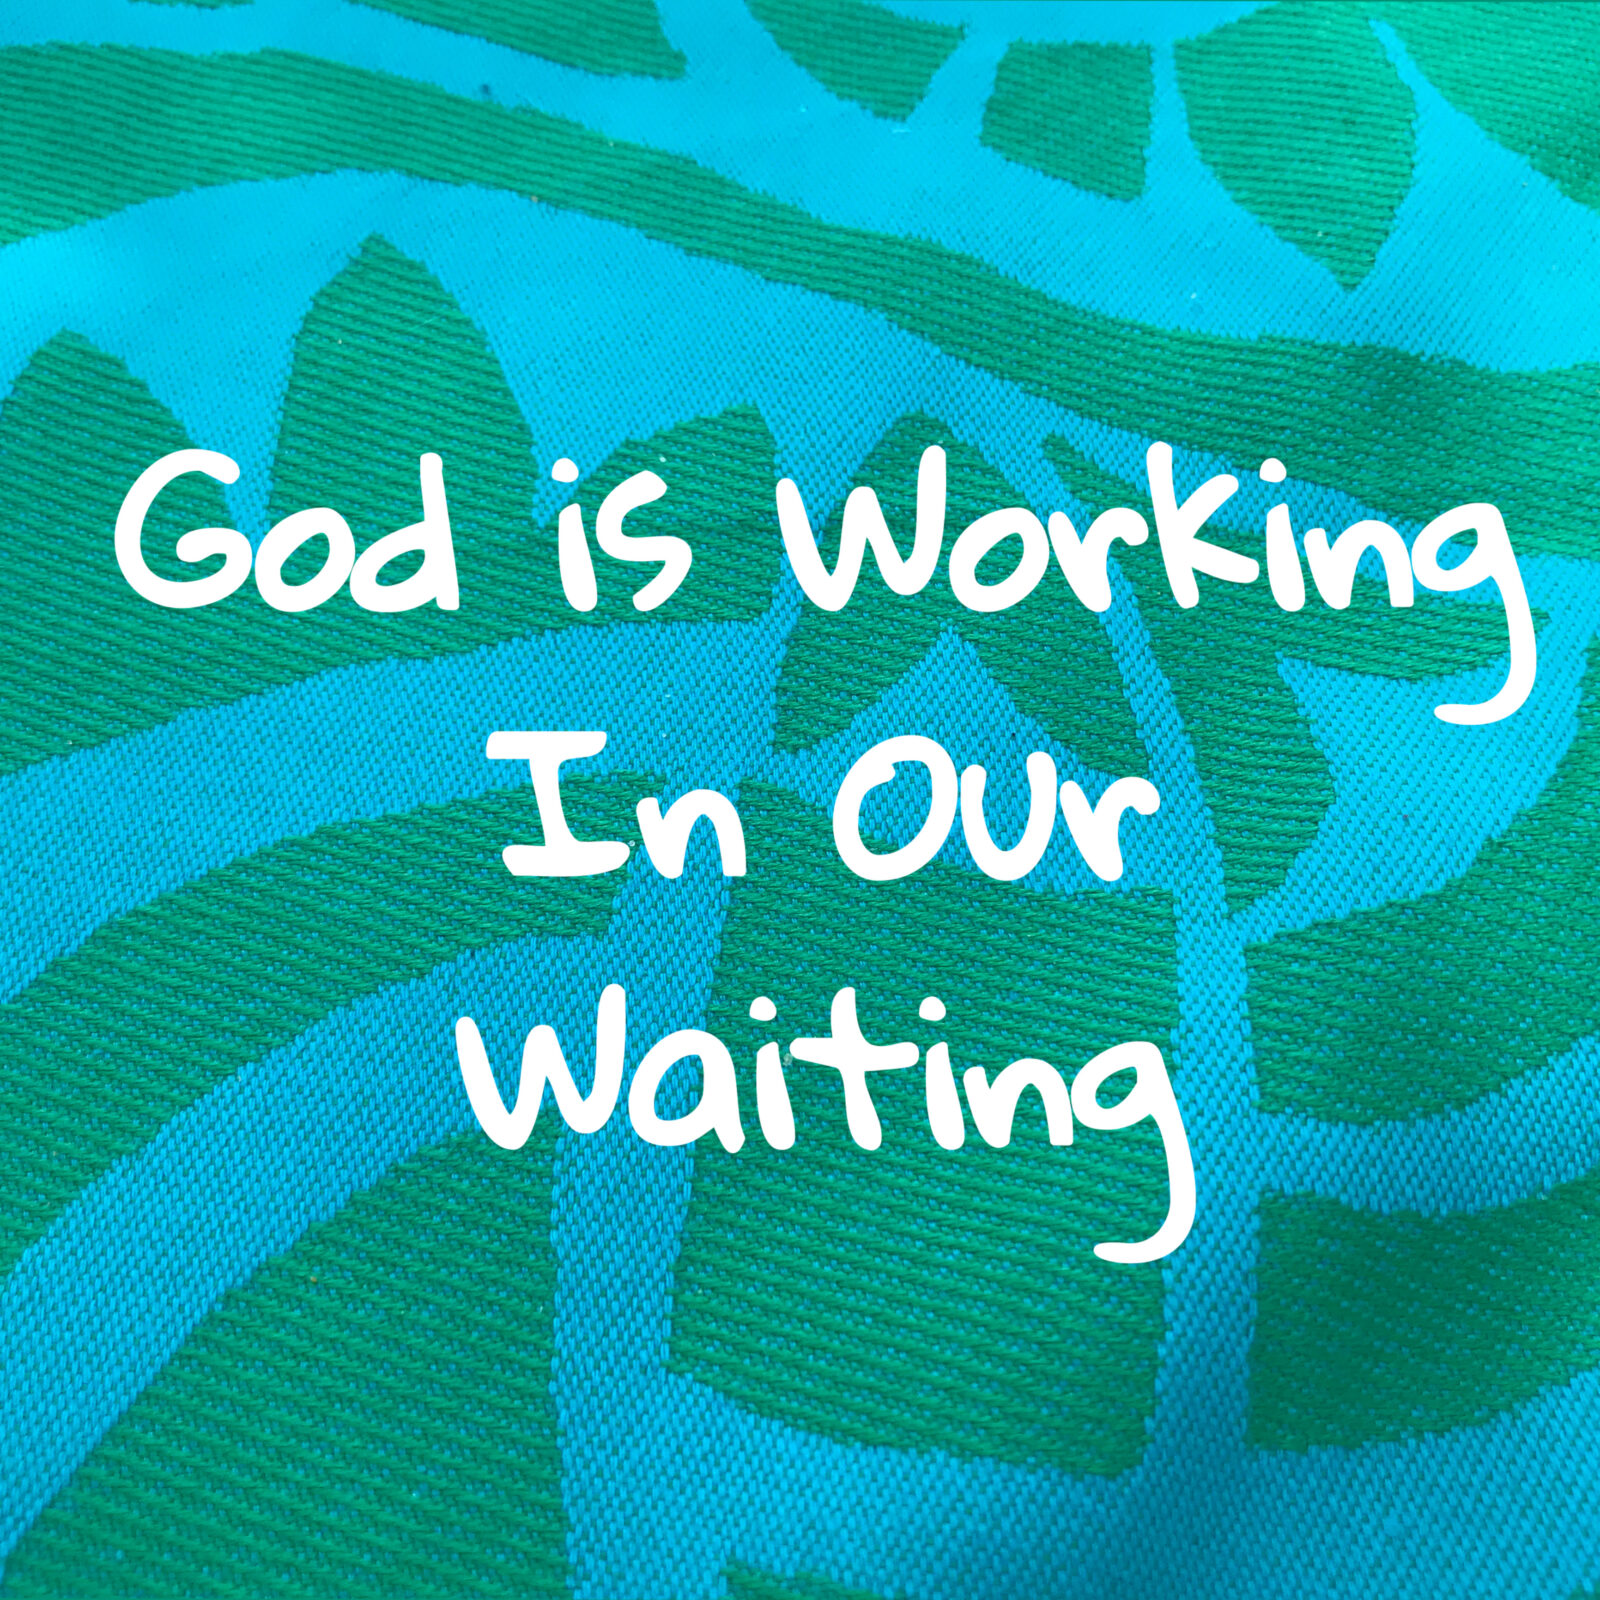 God is working in our waiting